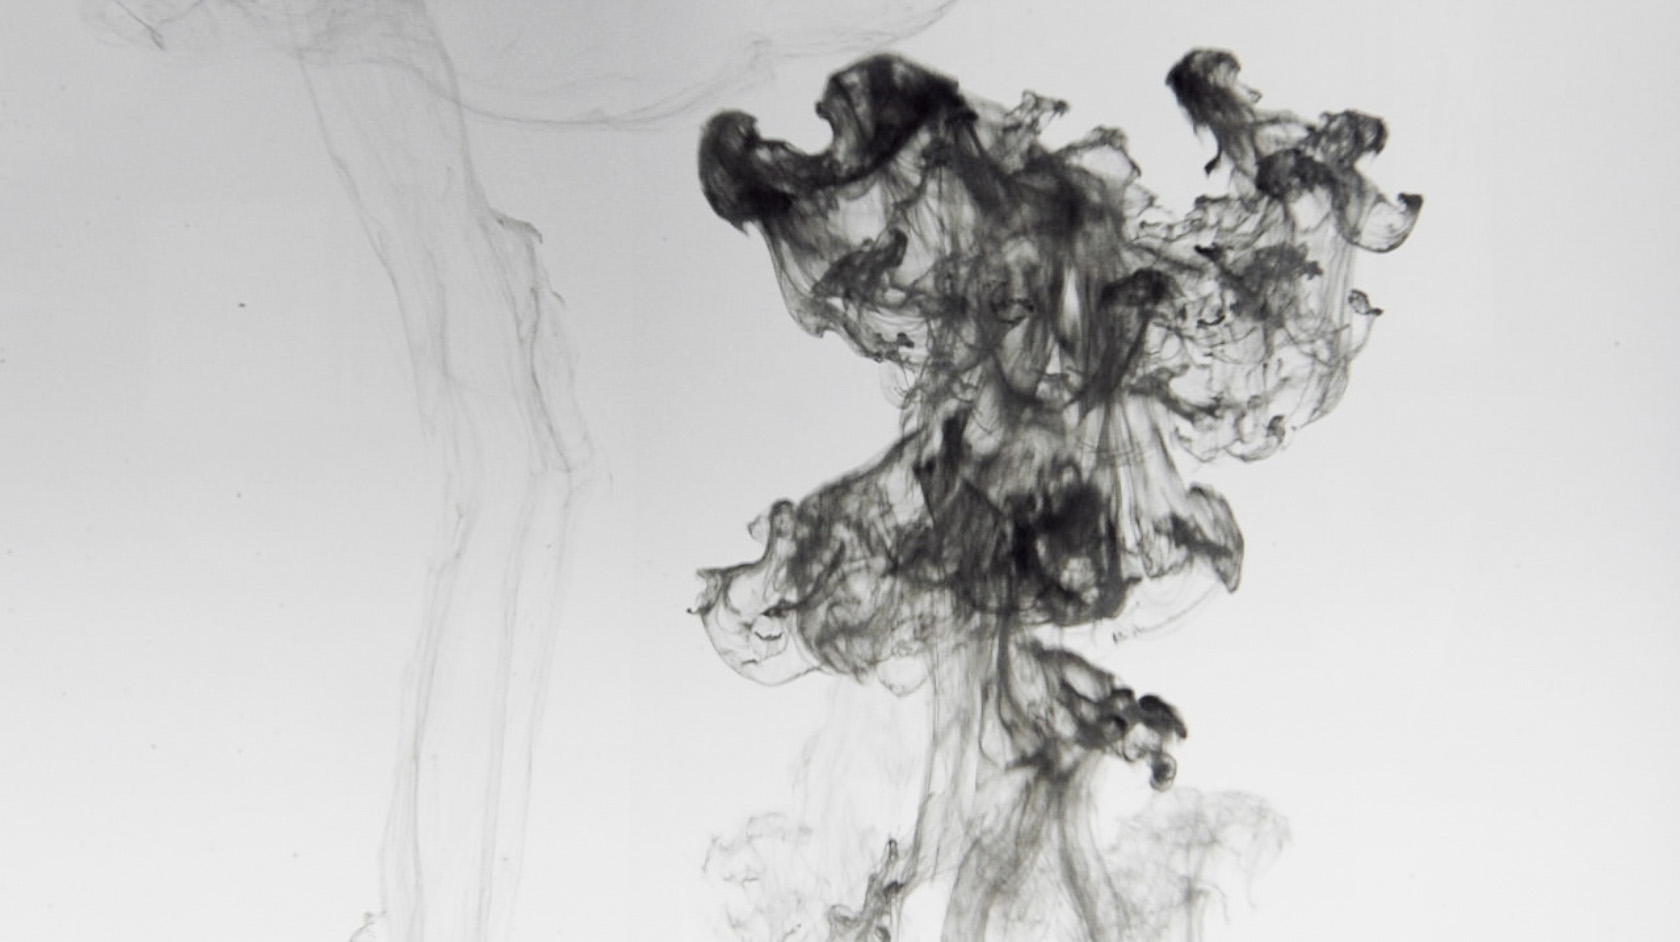 upside down ink tower in water in black and white from live visuals by Claudia Hansen